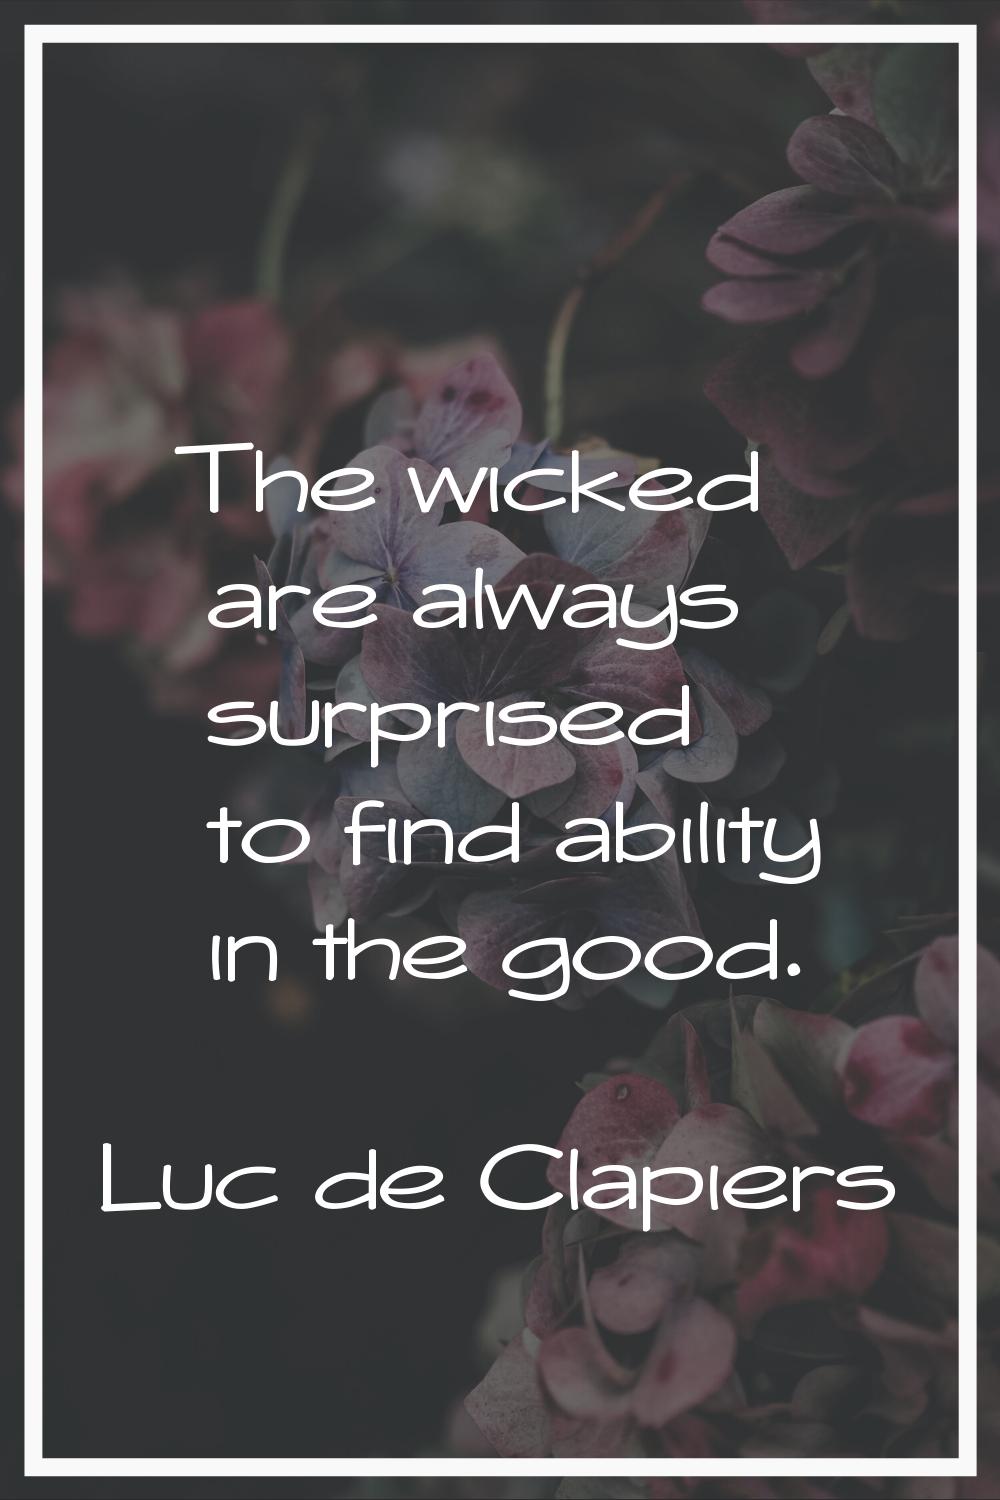 The wicked are always surprised to find ability in the good.